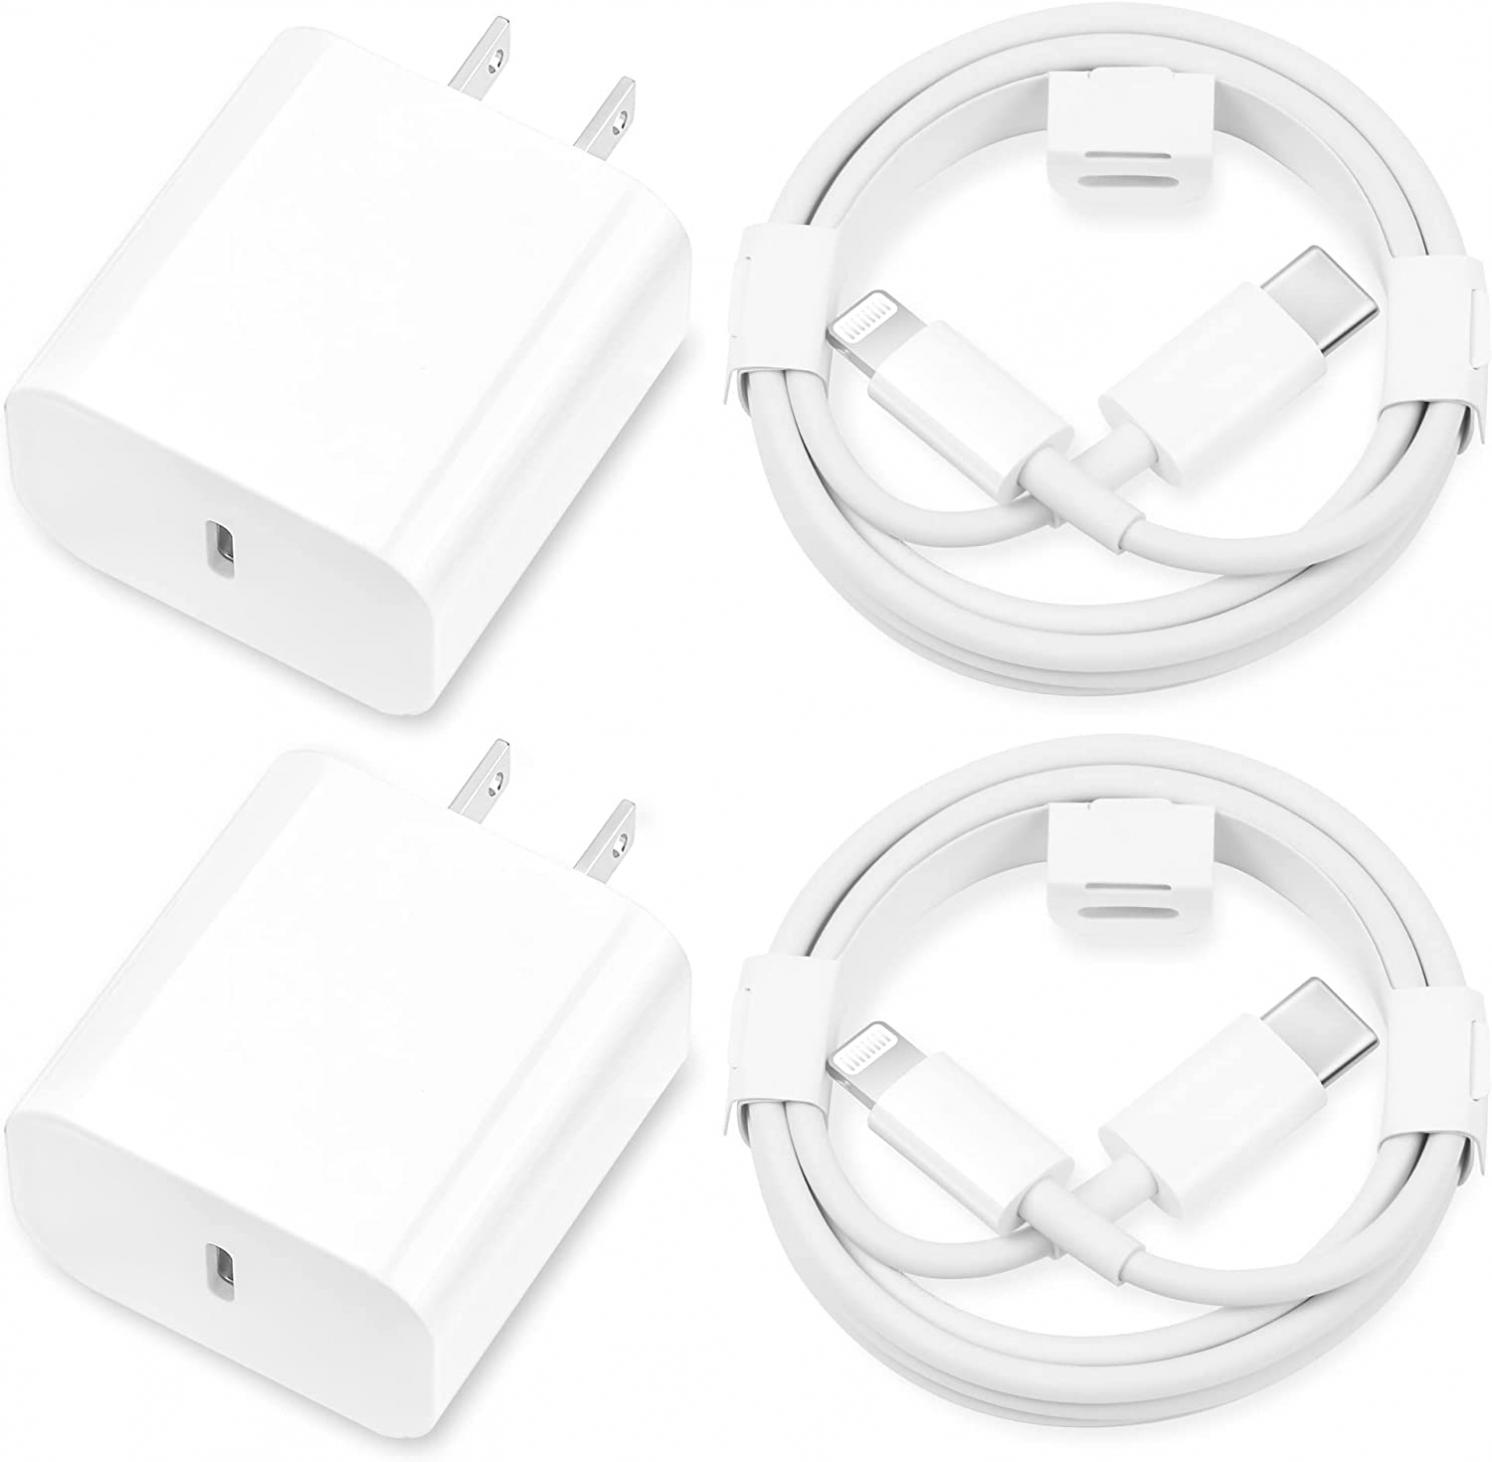 iPhone 11 12 13 14 Fast Charger,【Apple MFi Certified】2Pack 20W Type C Fast Charger Block with 6FT USB-C to Lightning Cable for iPhone 14/13/13 Pro/12/12 Pro/12 Pro Max/11/Xs Max/XR/X,iPad,AirPods Pro